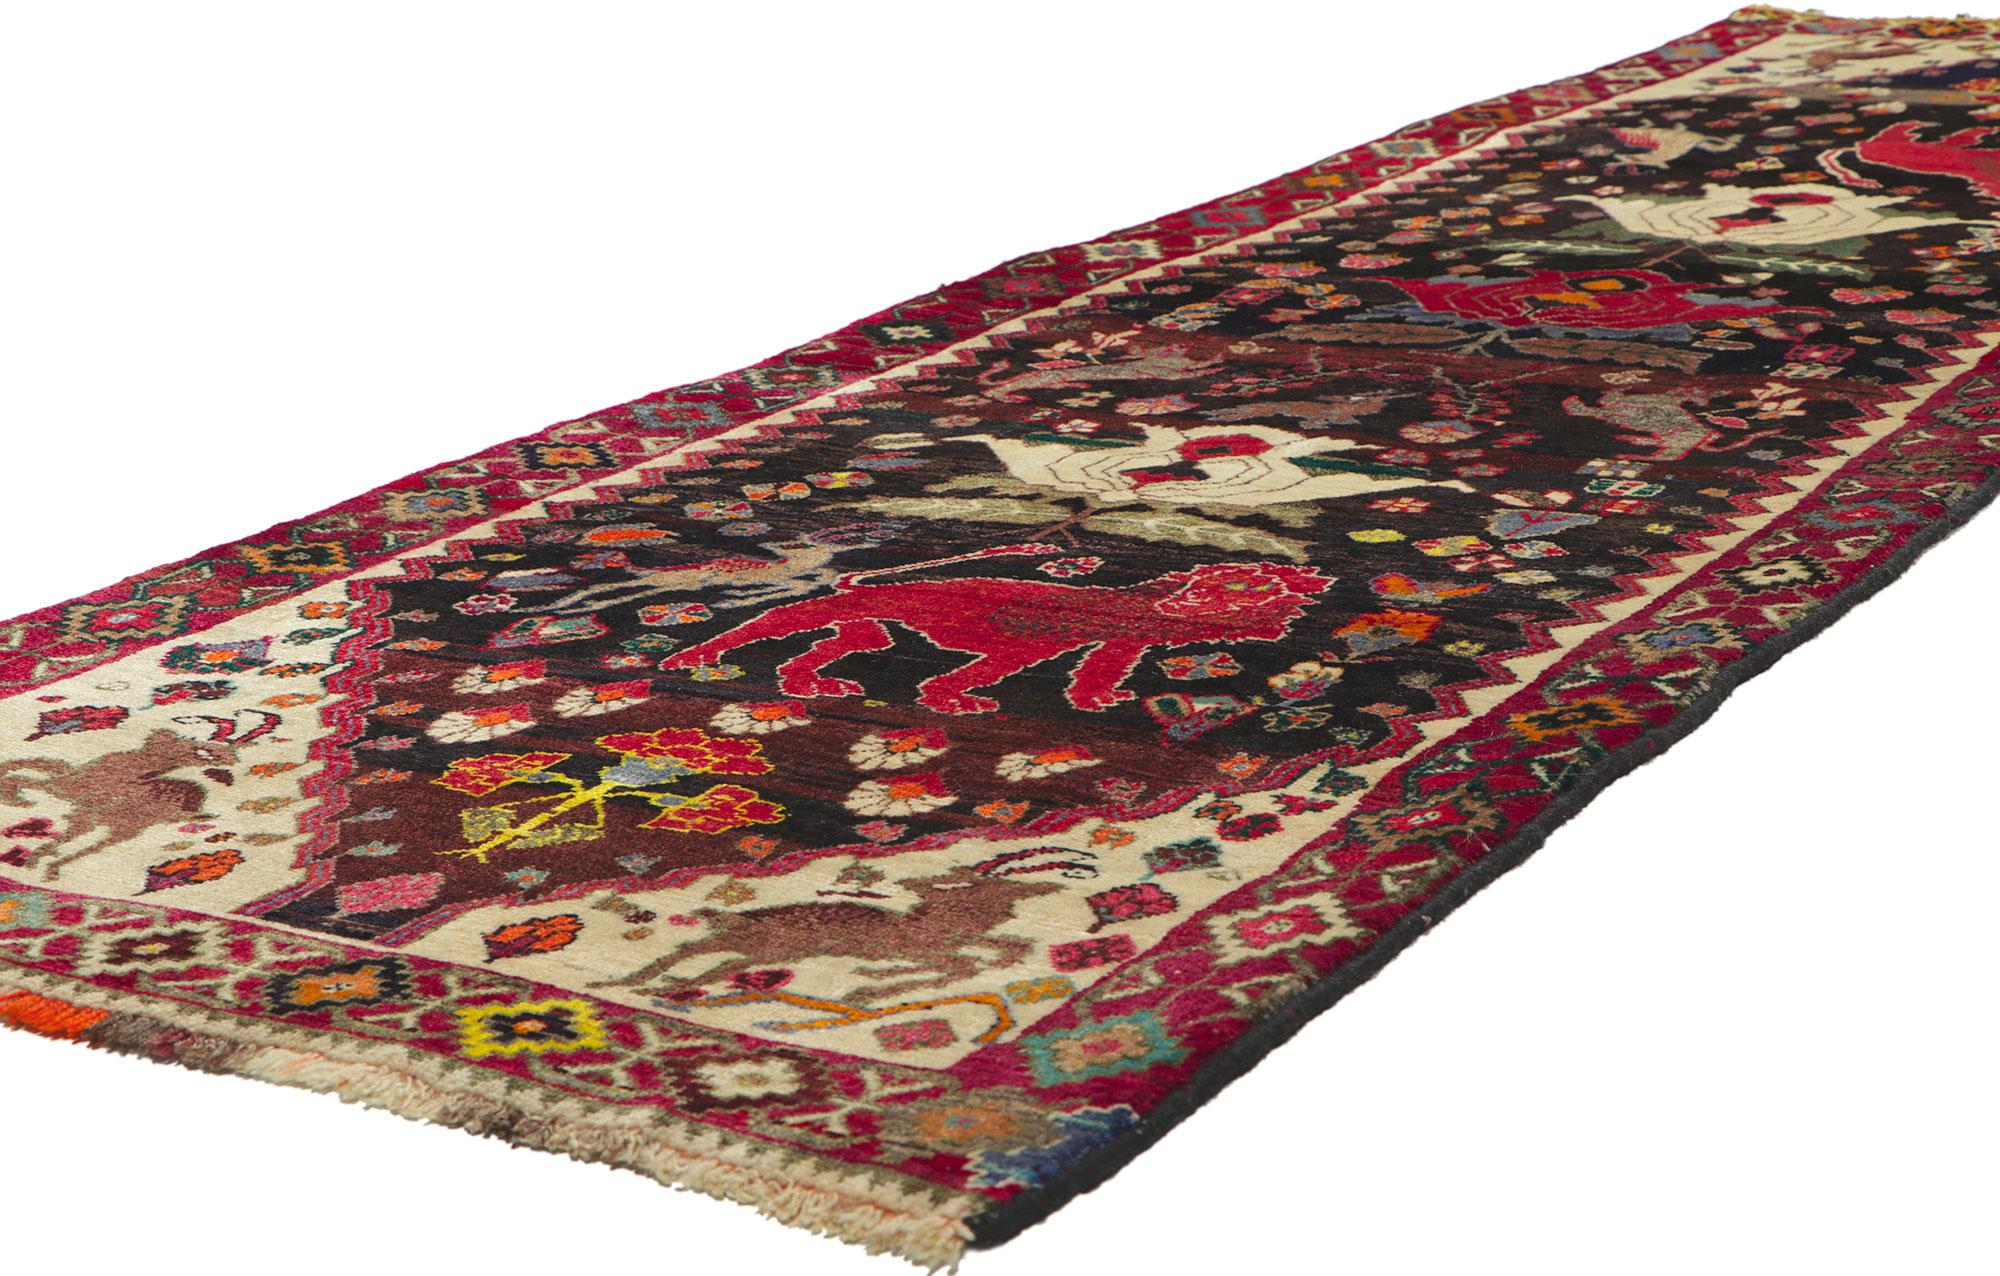 61092 Vintage Persian Shiraz Tribal rug runner with Zoomorphic Design 02'10 x 09'07. ?Reminiscences of an exotic journey and worldly sophistication, this hand-knotted wool vintage Persian Shiraz runner is a captivating vision of woven beauty. The